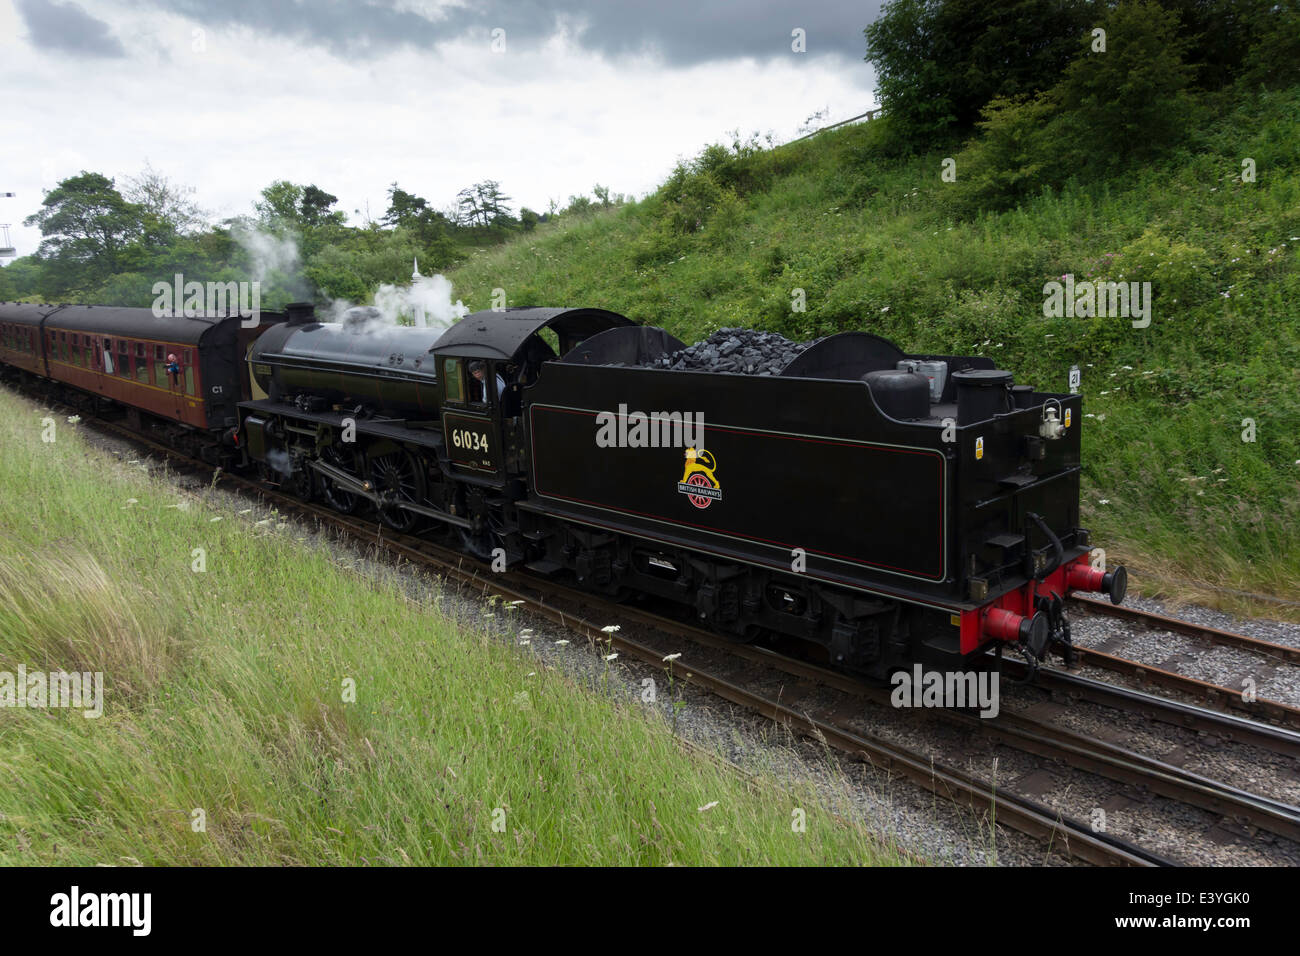 NYMR class B1 steam locomotive no. 61264 disguised as 61034 CHIRU arriving at Goathland station from Pickering June 29th 2014 Stock Photo